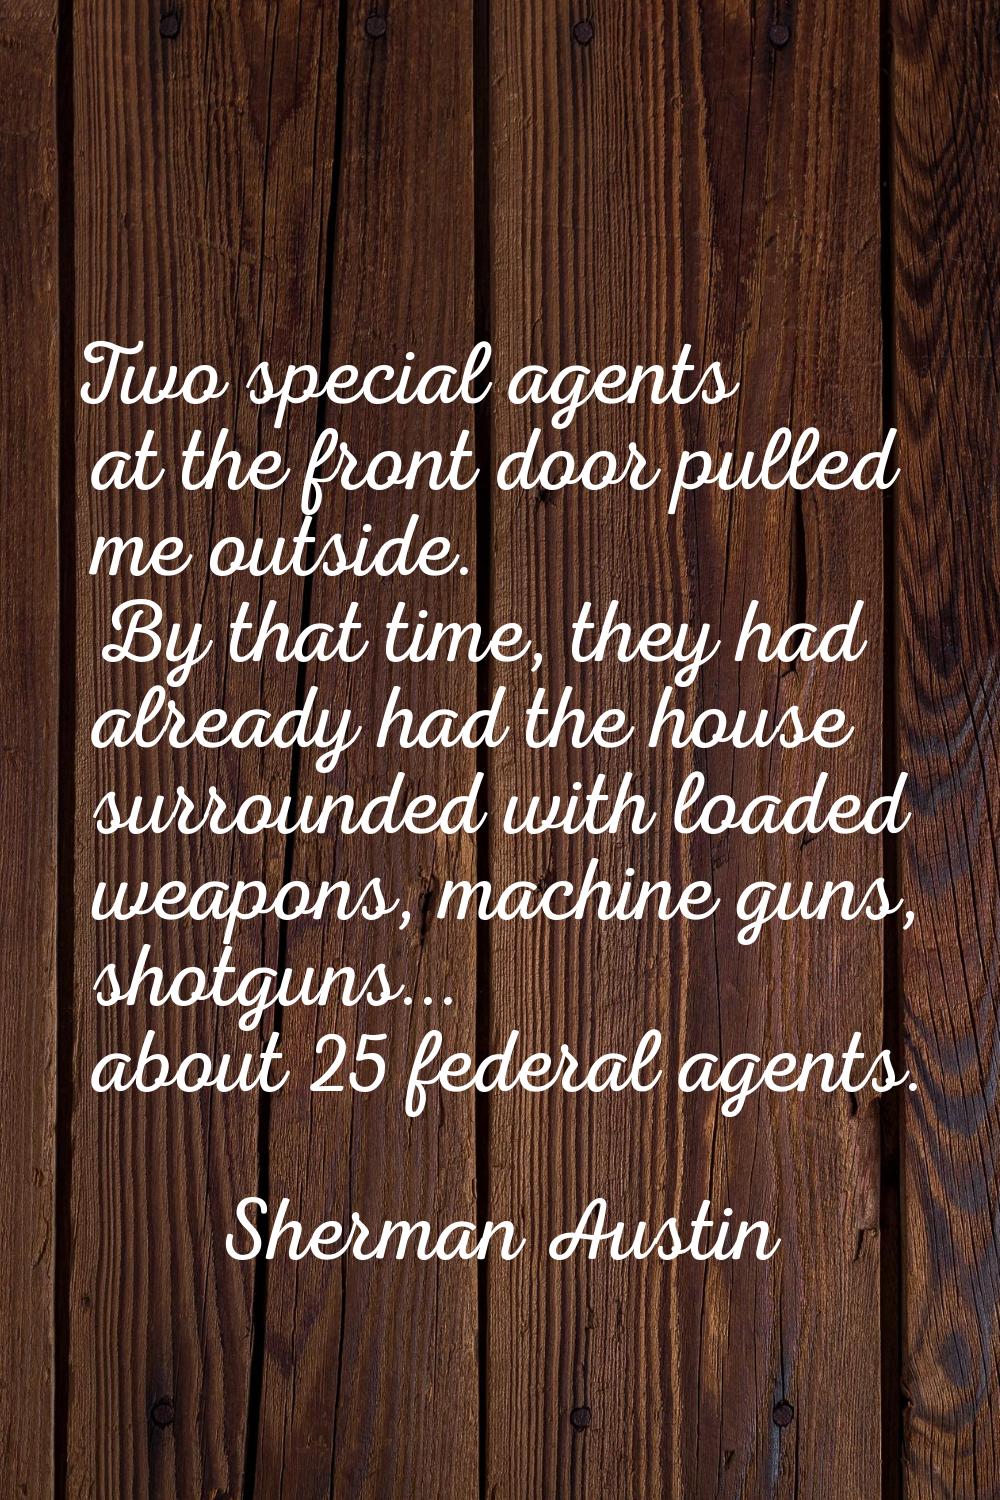 Two special agents at the front door pulled me outside. By that time, they had already had the hous